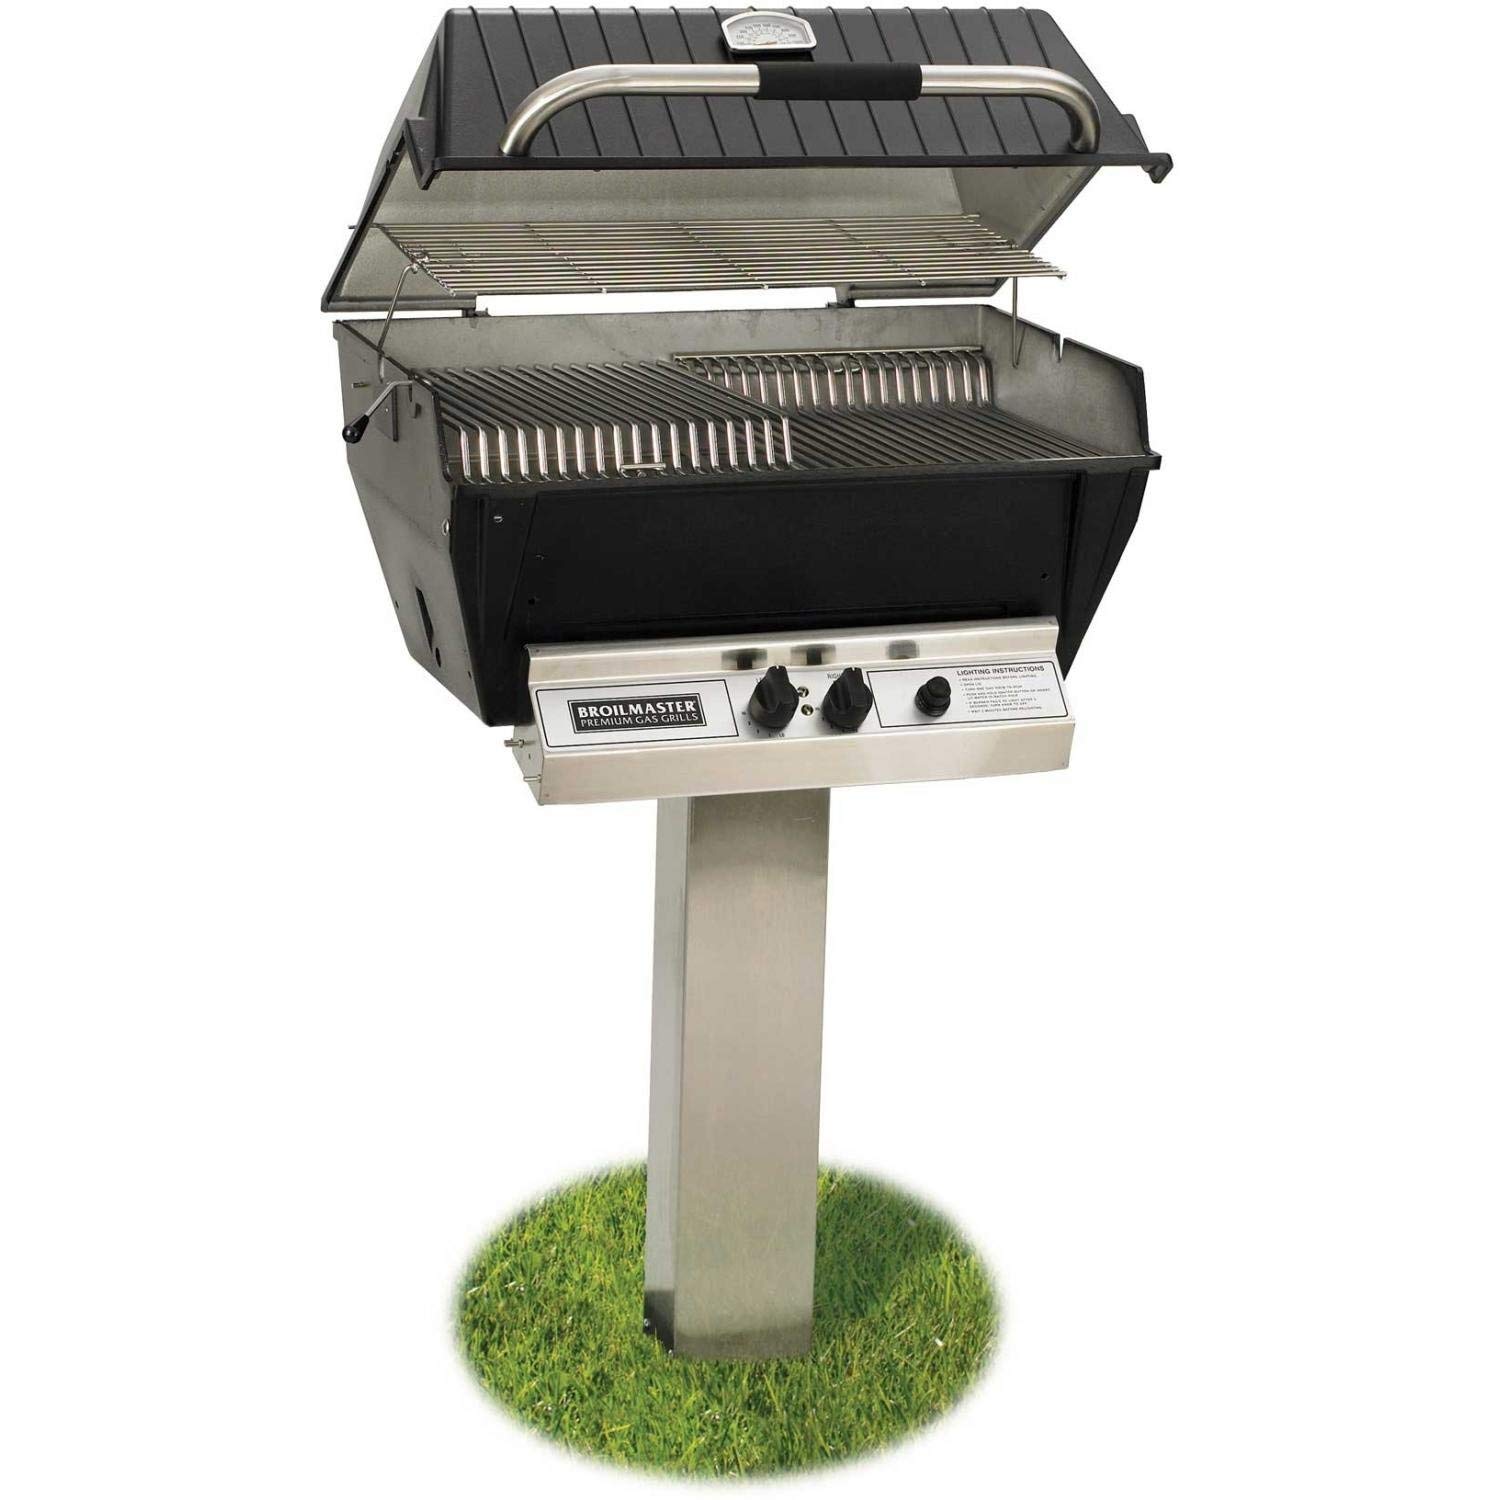 Barbecue Grill Price - Buy Electric, Charcoal and Propane Grills At Best Prices